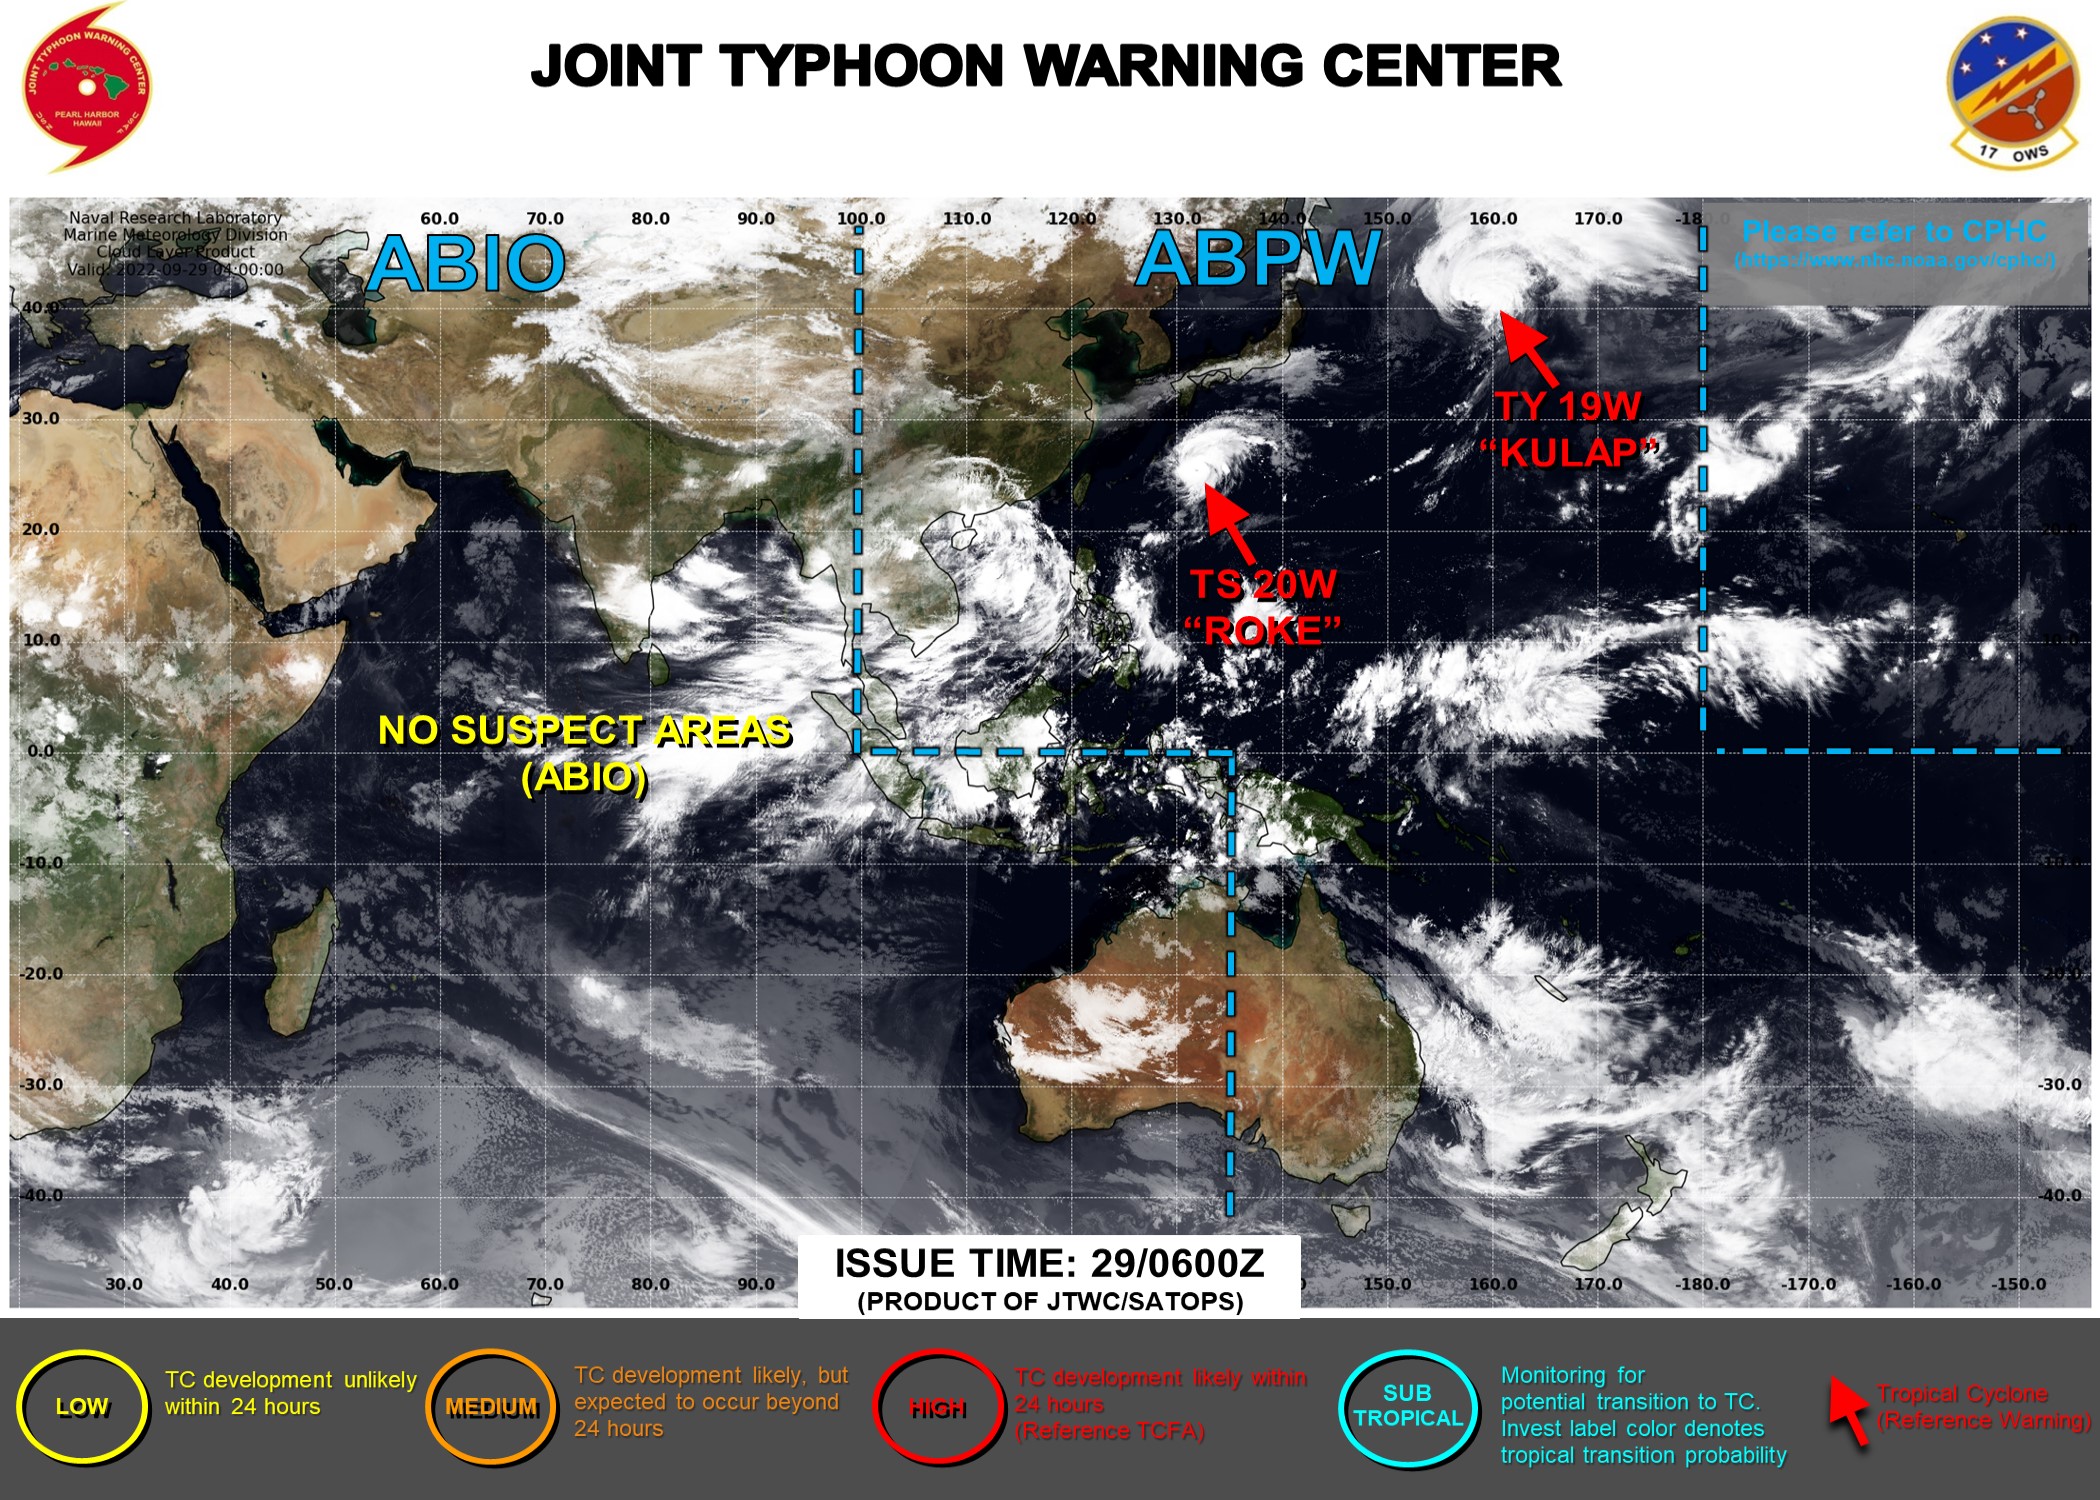 JTWC IS ISSUING 6HOURLY WARNINGS AND 3HOURLY SATELLITE BULLETINS ON 20W(ROKE). 3HOURLY SATELLITE BULLETINS ARE STILL ISSUED ON 19W(KULAP). THEY WERE DISCONTINUED ON 02S(ASHELY) AND 18W(NORU) AT 29/00UTC.